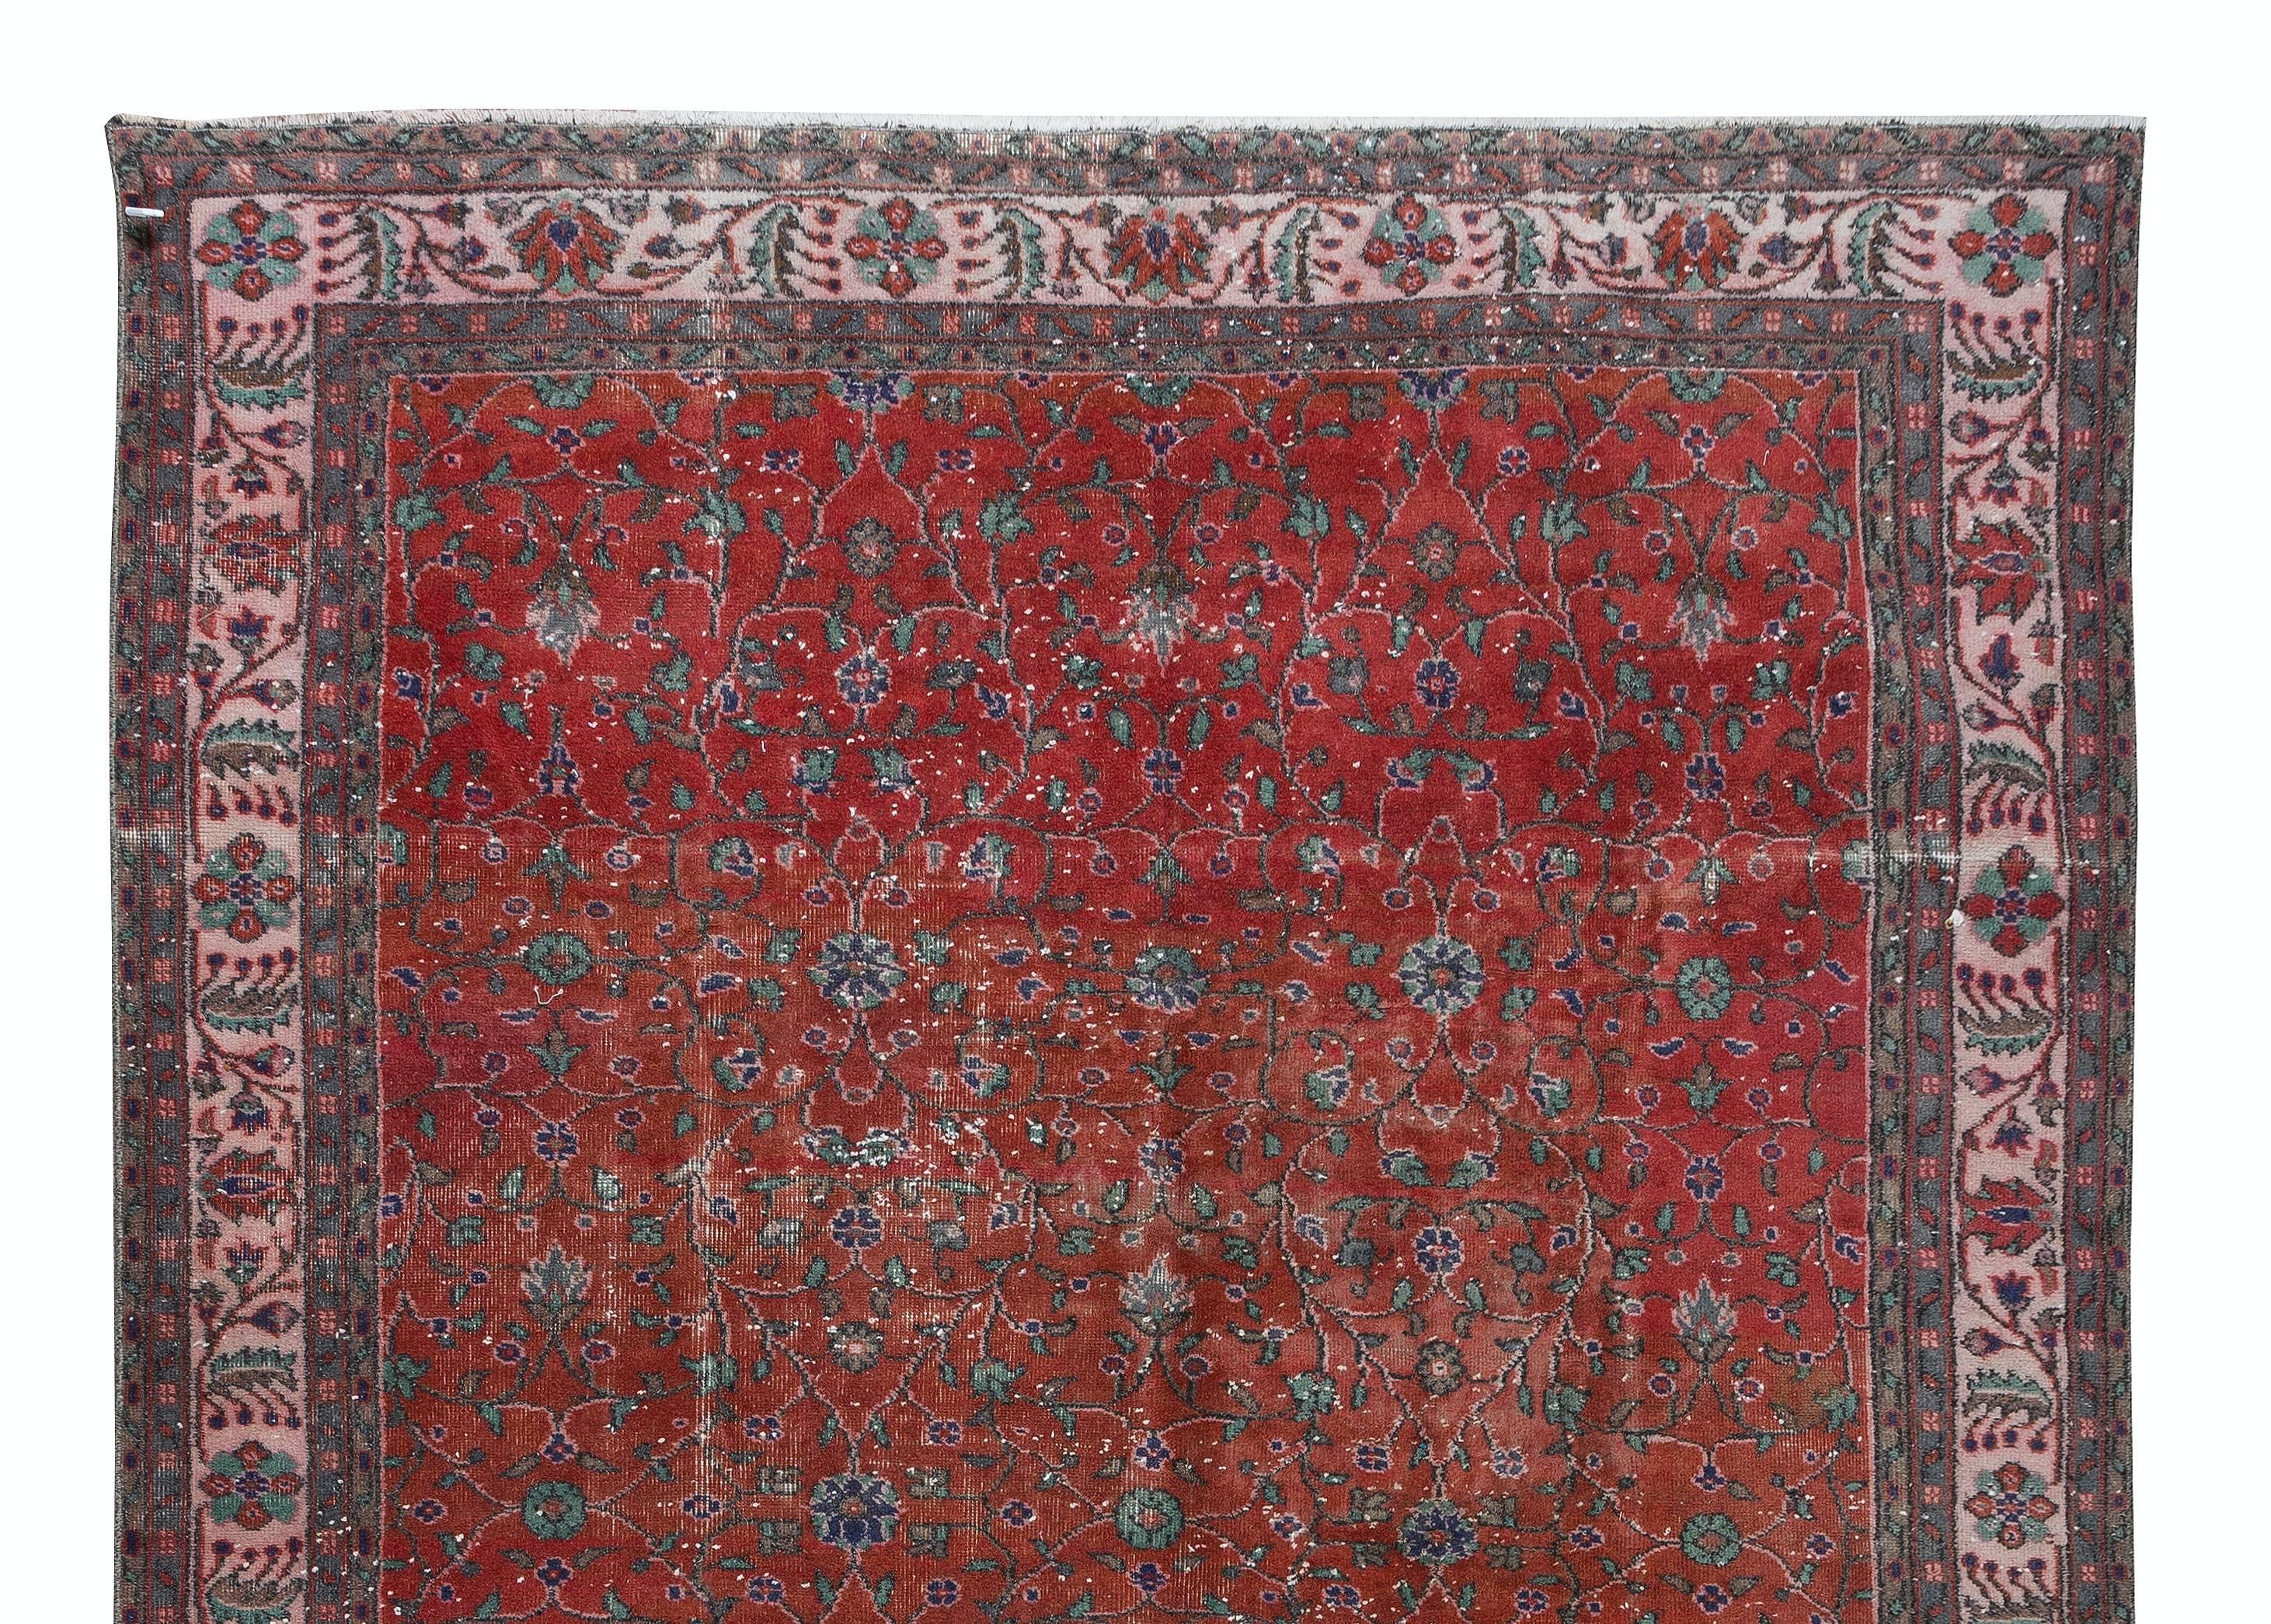 Modern 7x10.4 Ft Traditional Handmade Vintage Turkish Rug in Red, Beige, Blue and Green